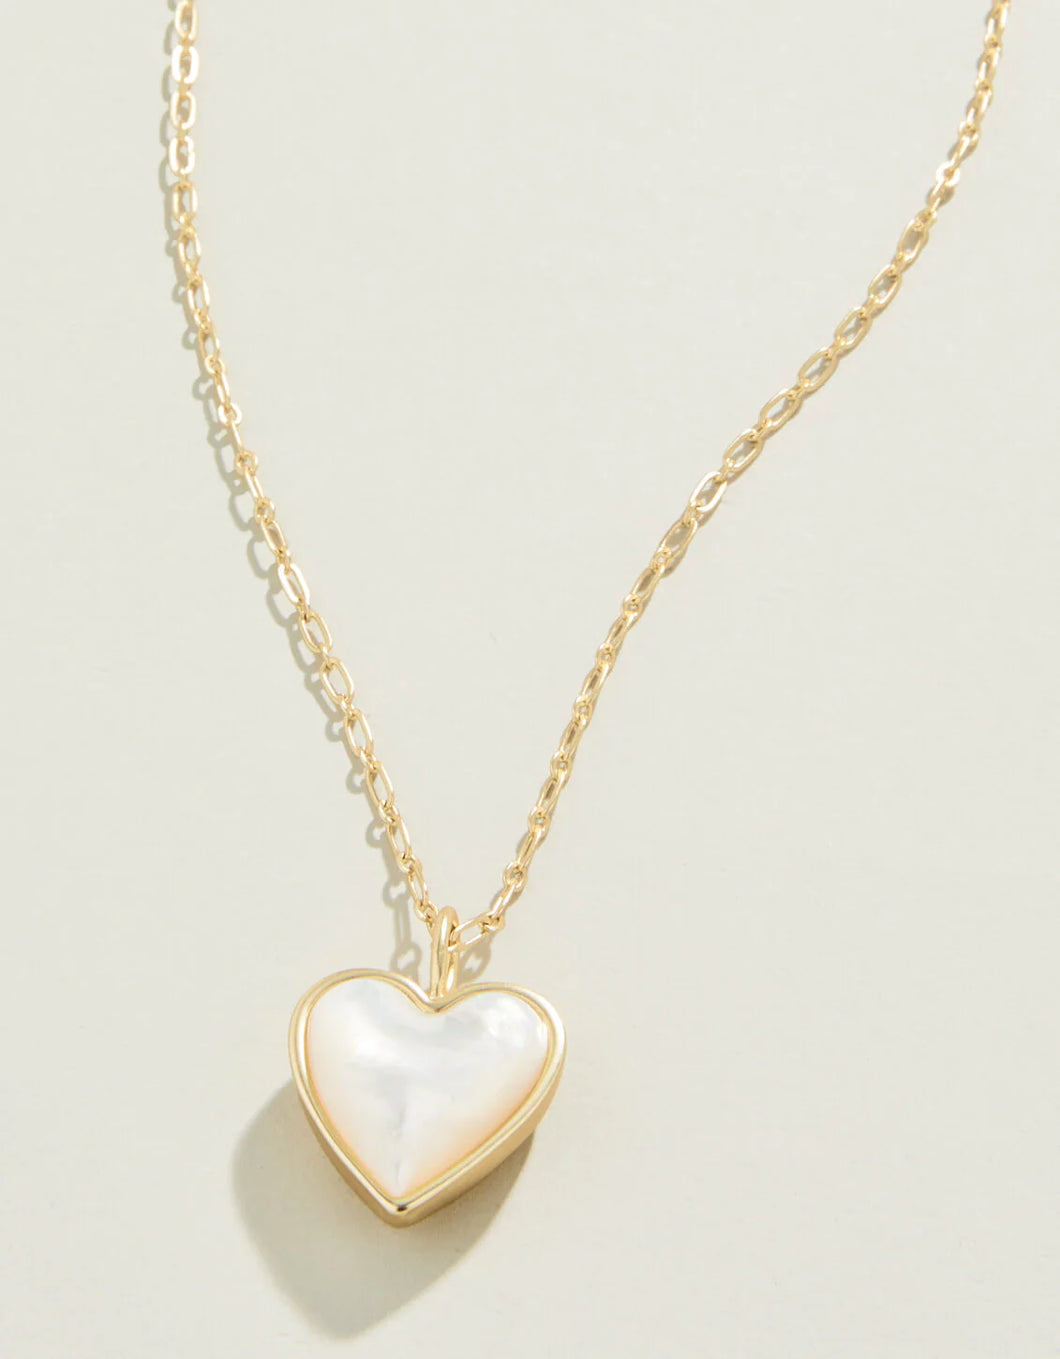 Full Heart Necklace 18